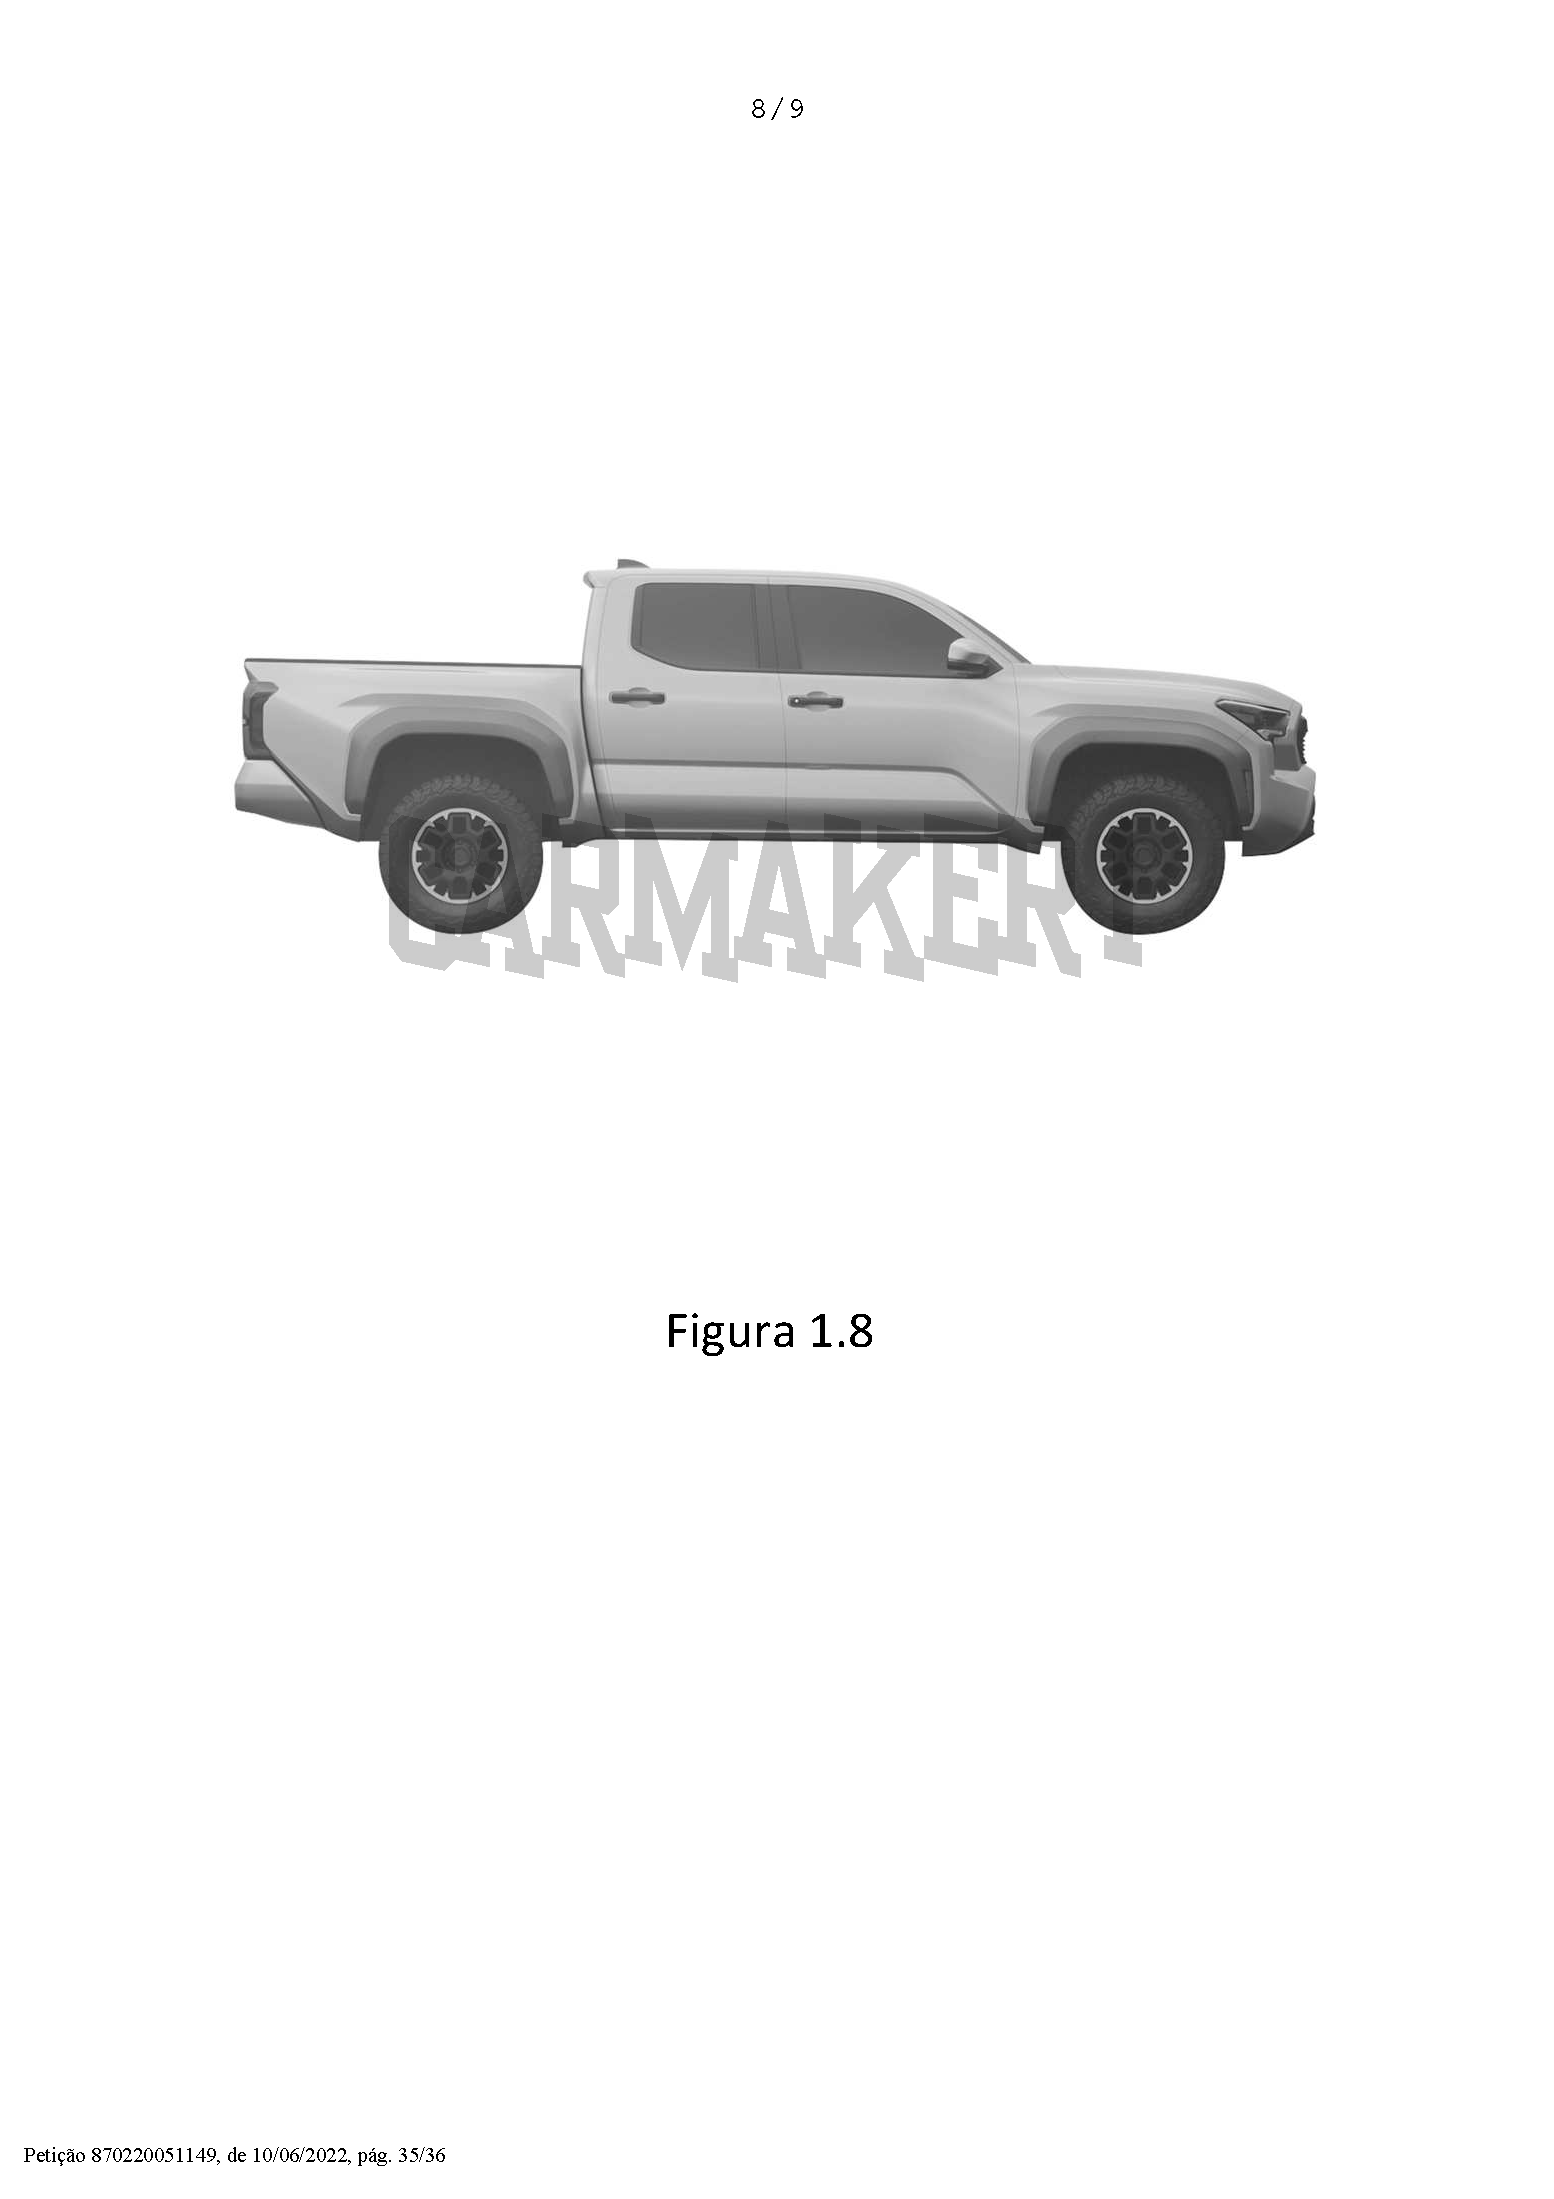 2024 Tacoma 2024 Tacoma Design Images Revealed in Patent! 📸 🕵🏻‍♂️ 302022003011_Page_11